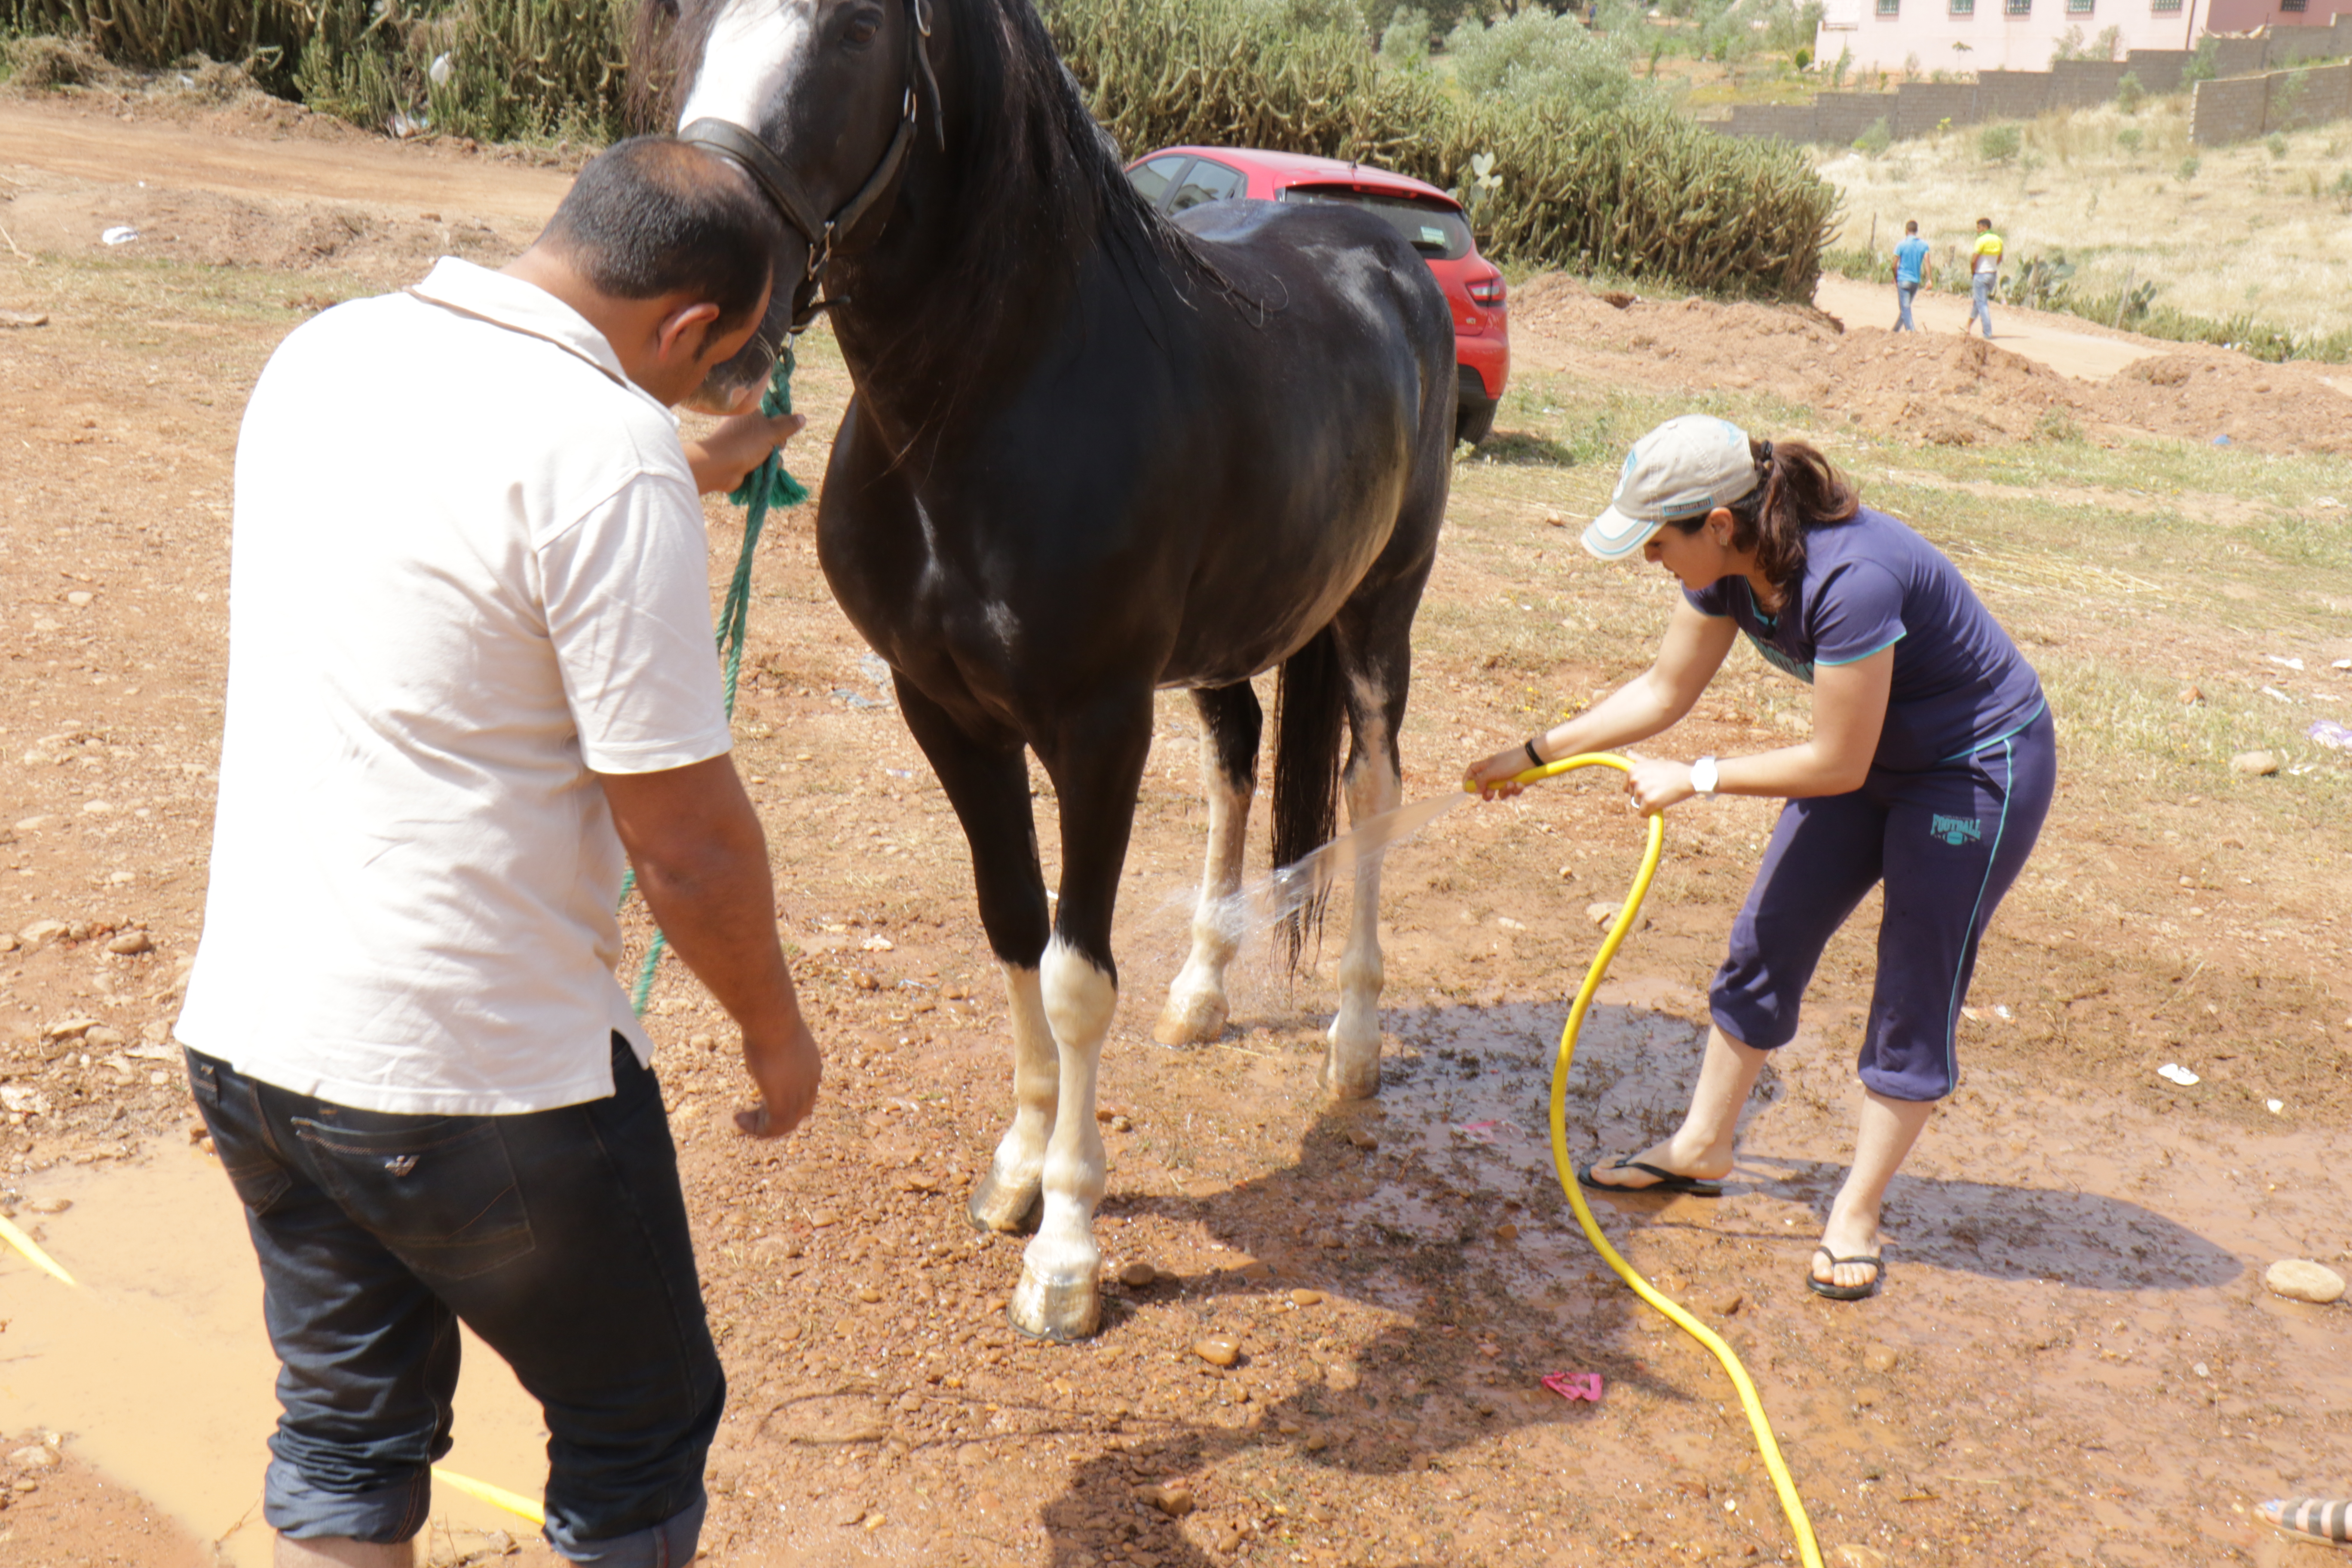 A man holds the reins of the horse while Amal, in jeans and a t-shirt, points a hose at the horse's stomach.